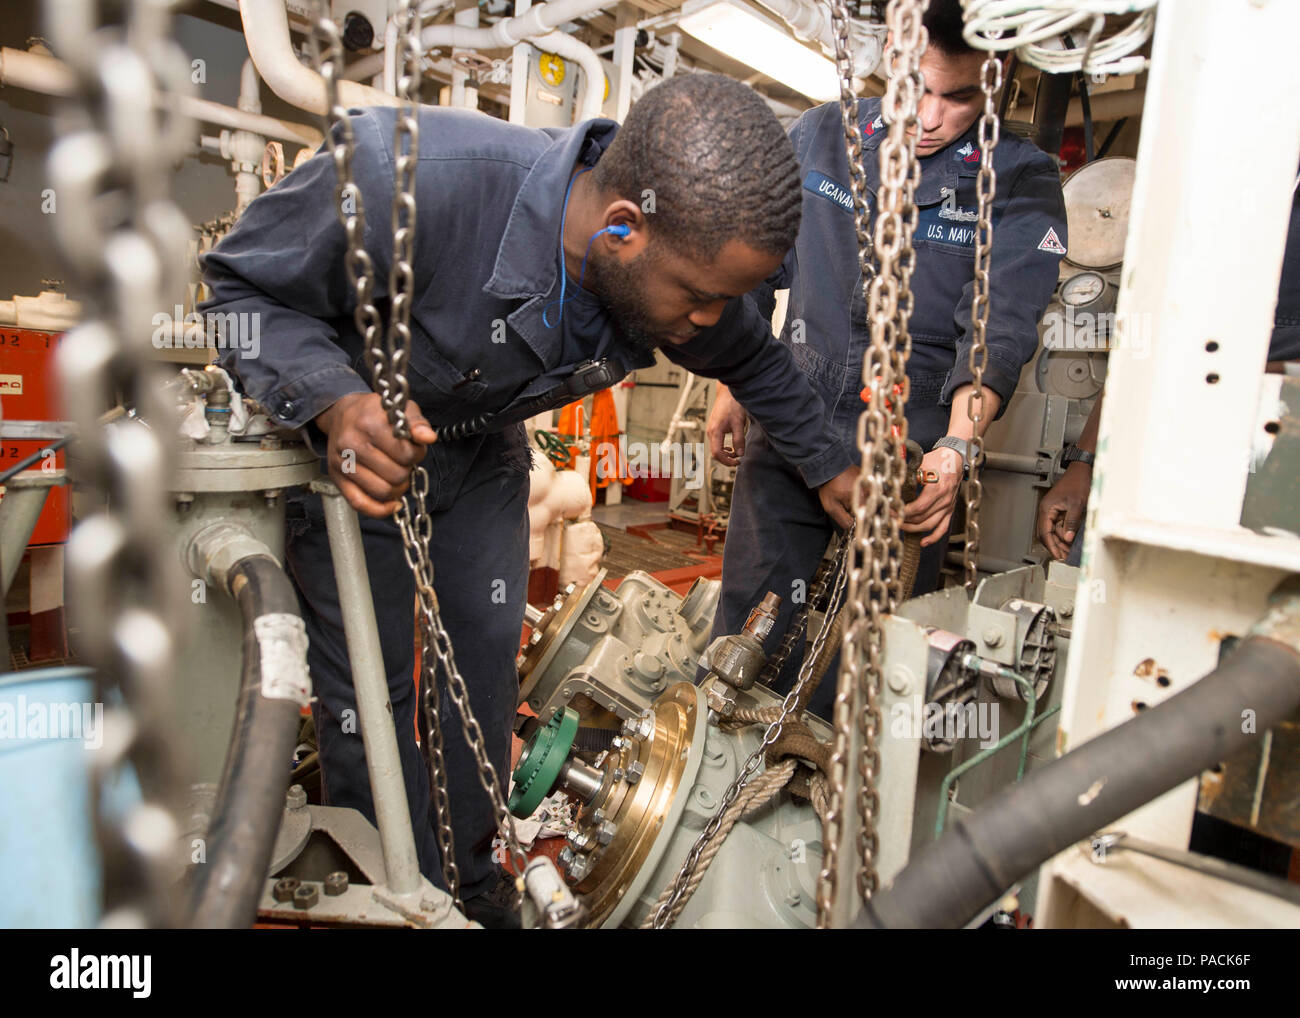 160318-N-DQ503-006 ATLANTIC OCEAN (March 18, 2016) – Gas Turbine Systems Technician 2nd Class Kevin Elliot, from Newark, N.J., hoists a replacement compressor into place in a main engine room aboard the guided-missile destroyer USS Roosevelt (DDG 80). Roosevelt is underway conducting Composite Training Unit Exercise (COMPTUEX) with the Dwight D. Eisenhower Carrier Strike Group in preparation for a future deployment. (U.S. Navy Photo by Mass Communication Specialist 3rd Class Taylor A. Elberg/Released) Stock Photo